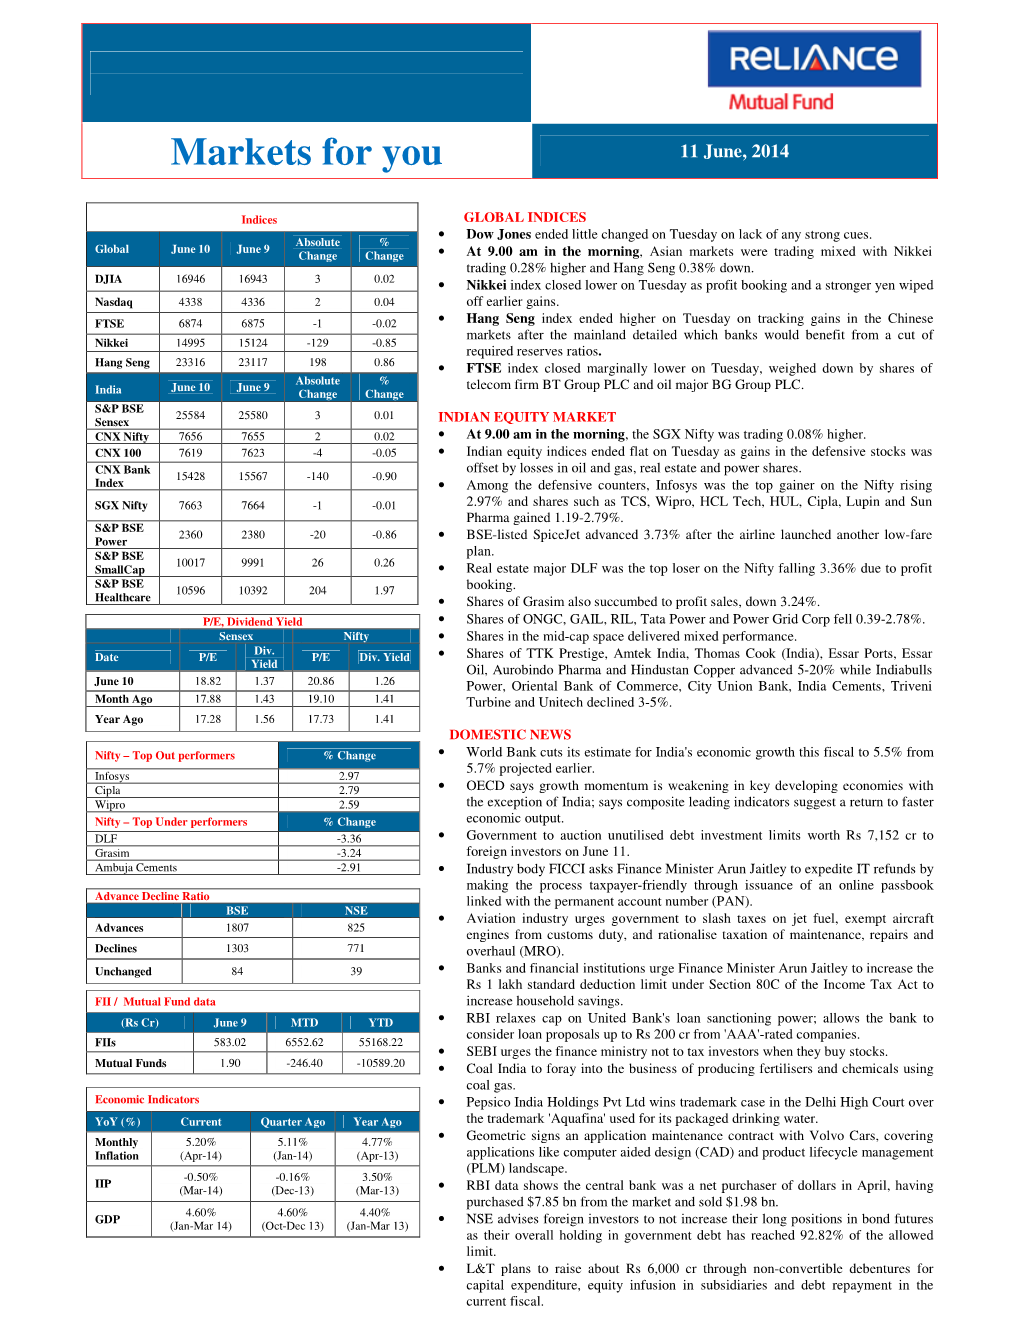 Markets for You 11 June, 2014